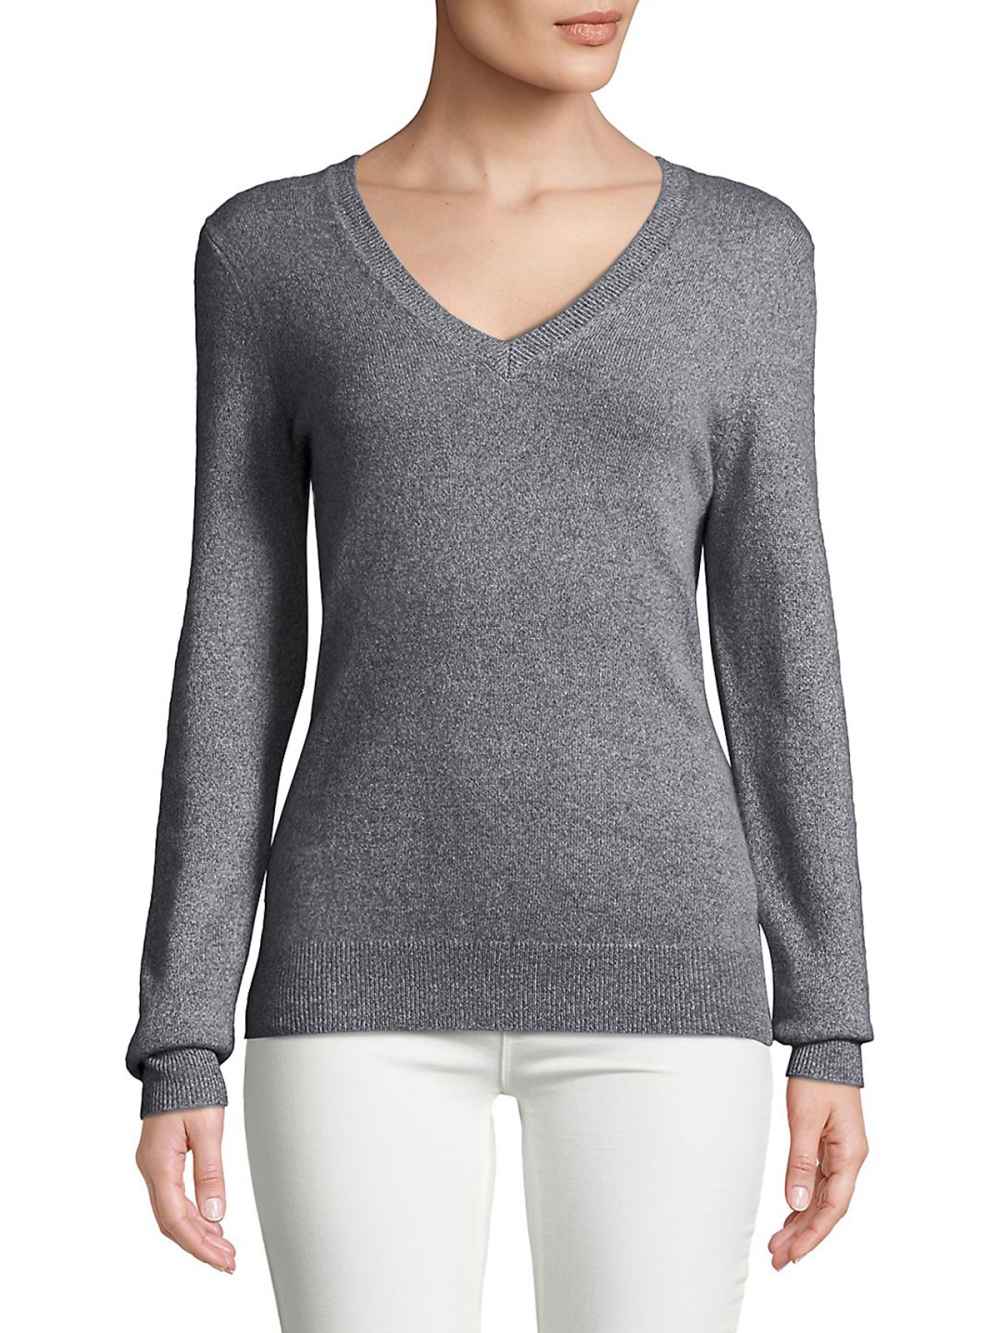 Lord and Taylor Sweater